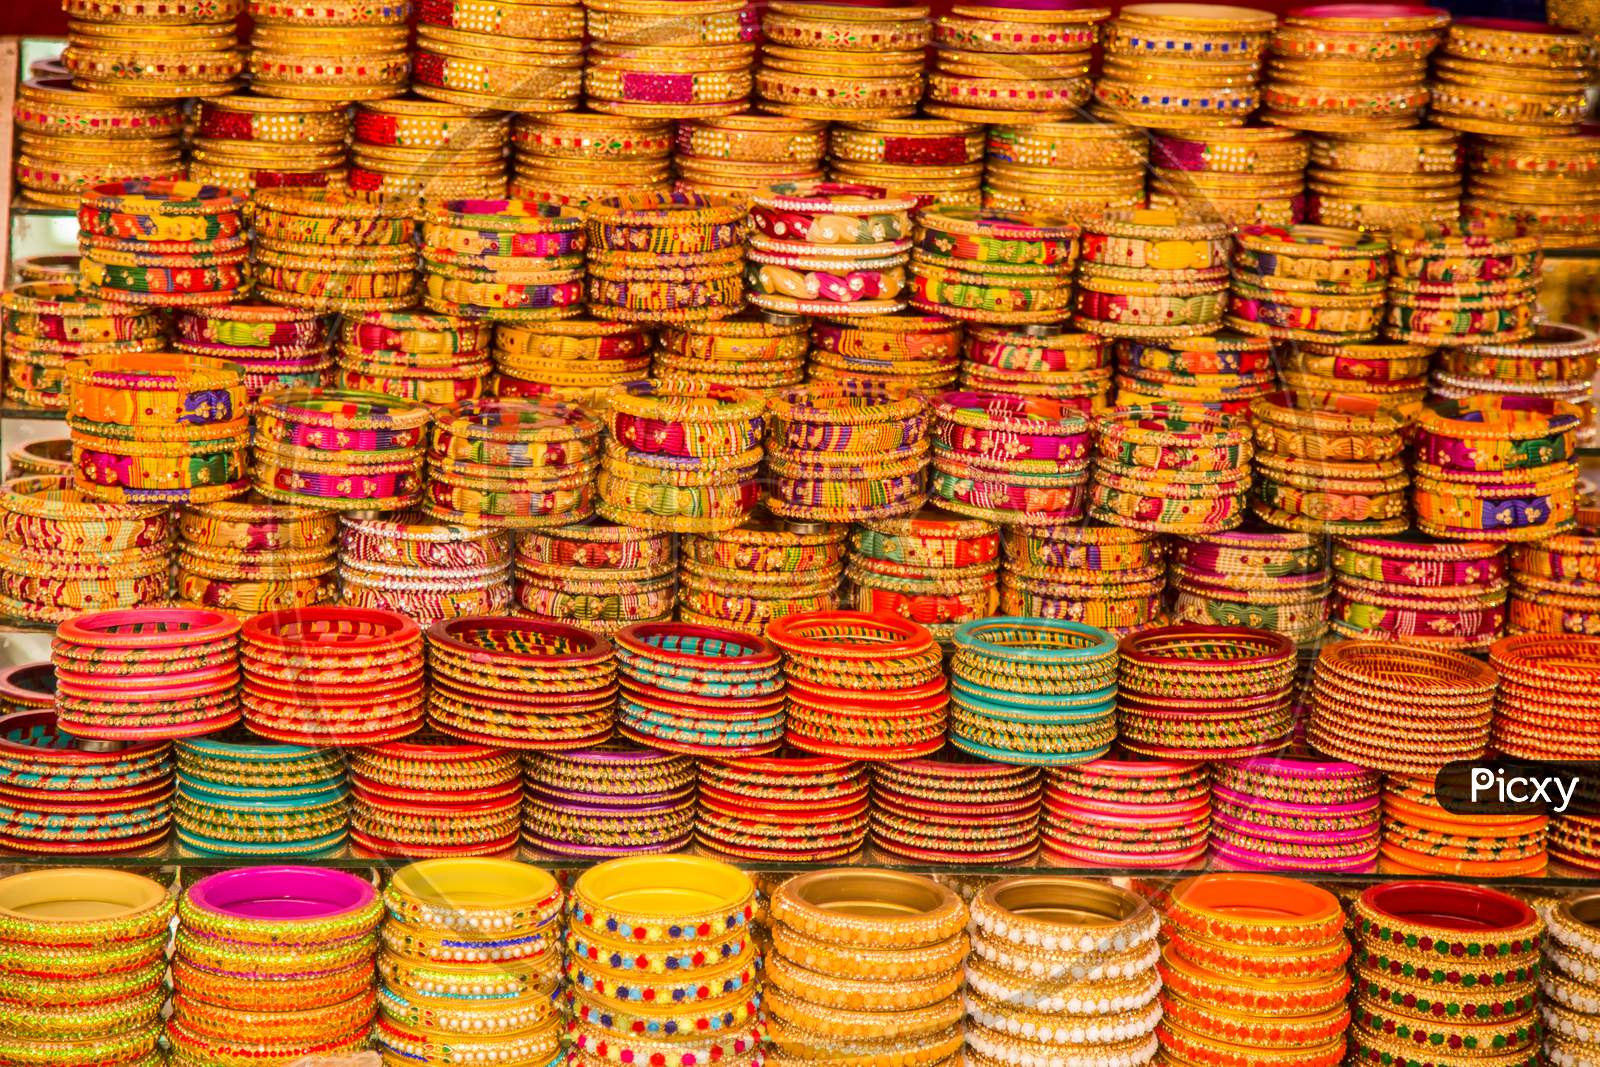 Indian Colorful Bracelets And Golden Bangles Or Armbands Displayed In Local Shop In A Market Of Pushkar, Rajasthan, India